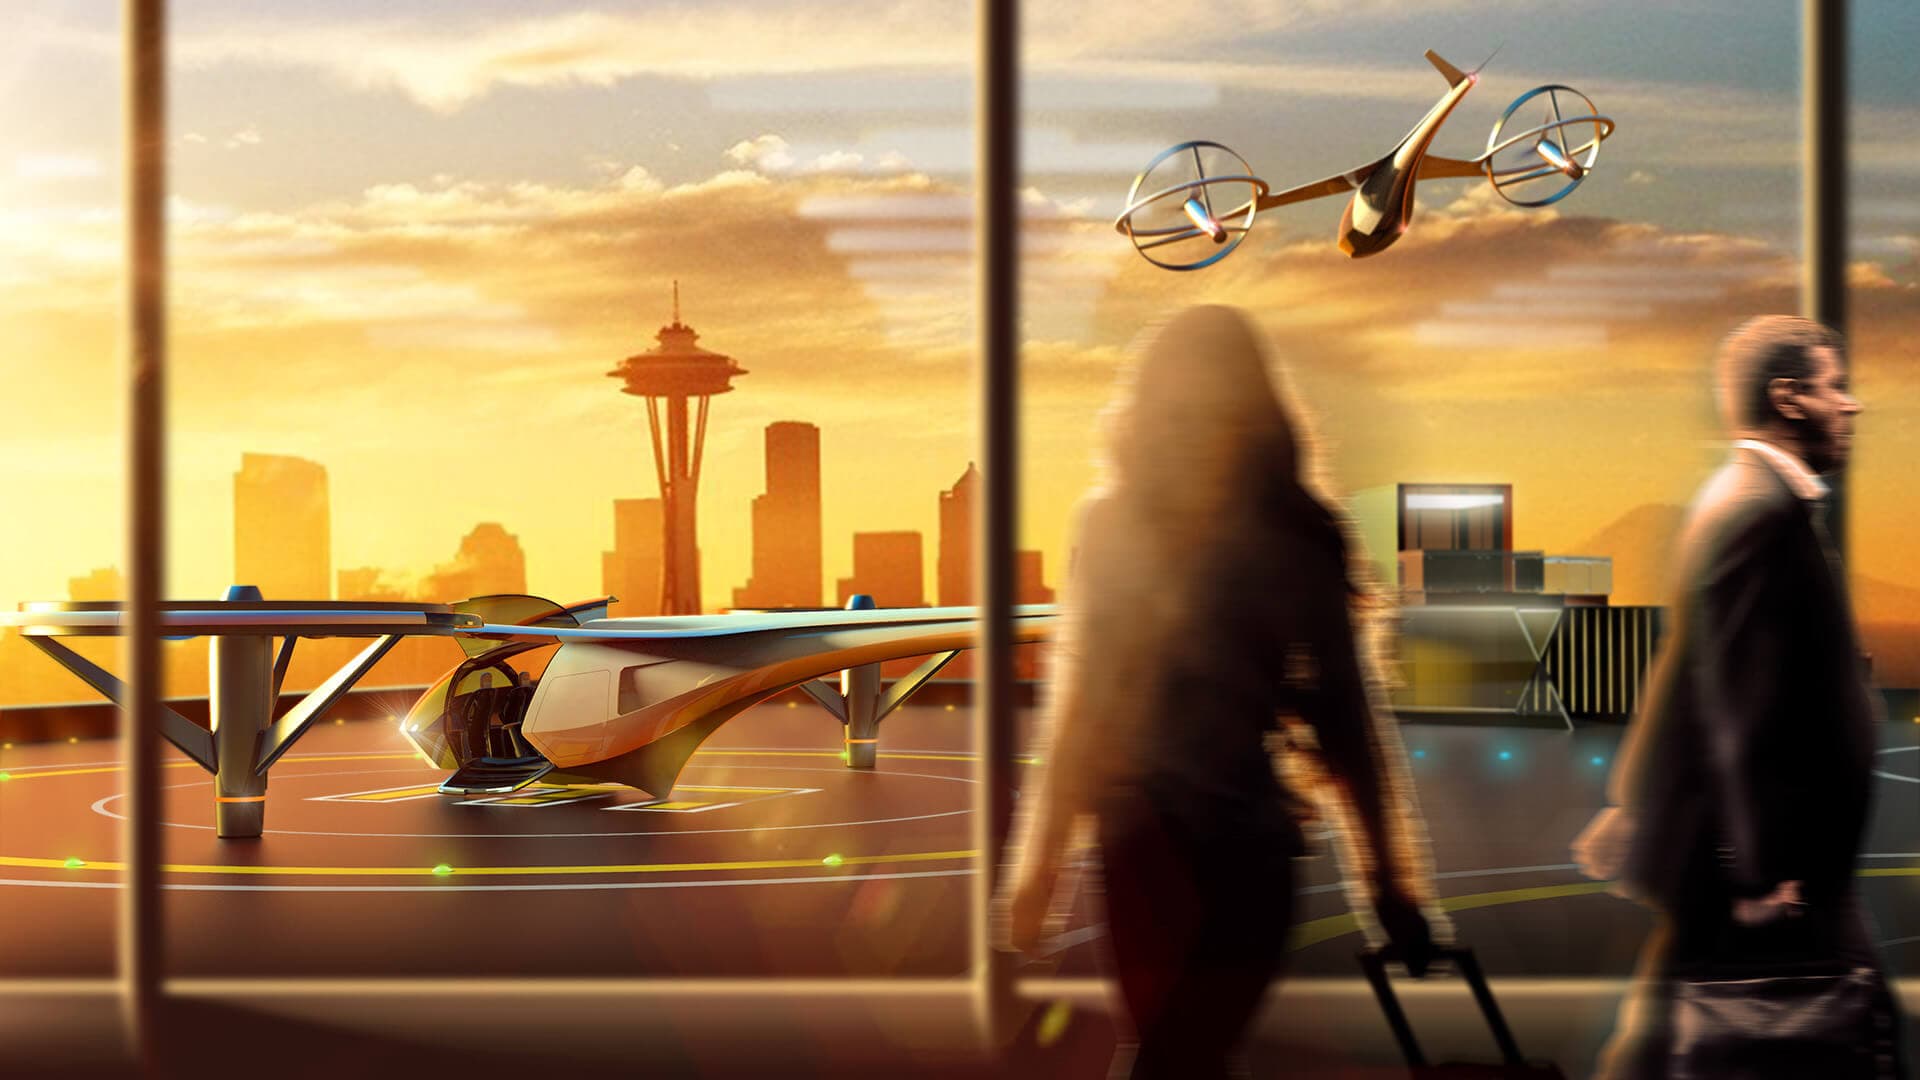 Vertiport outside the city of Seattle for future flying taxis